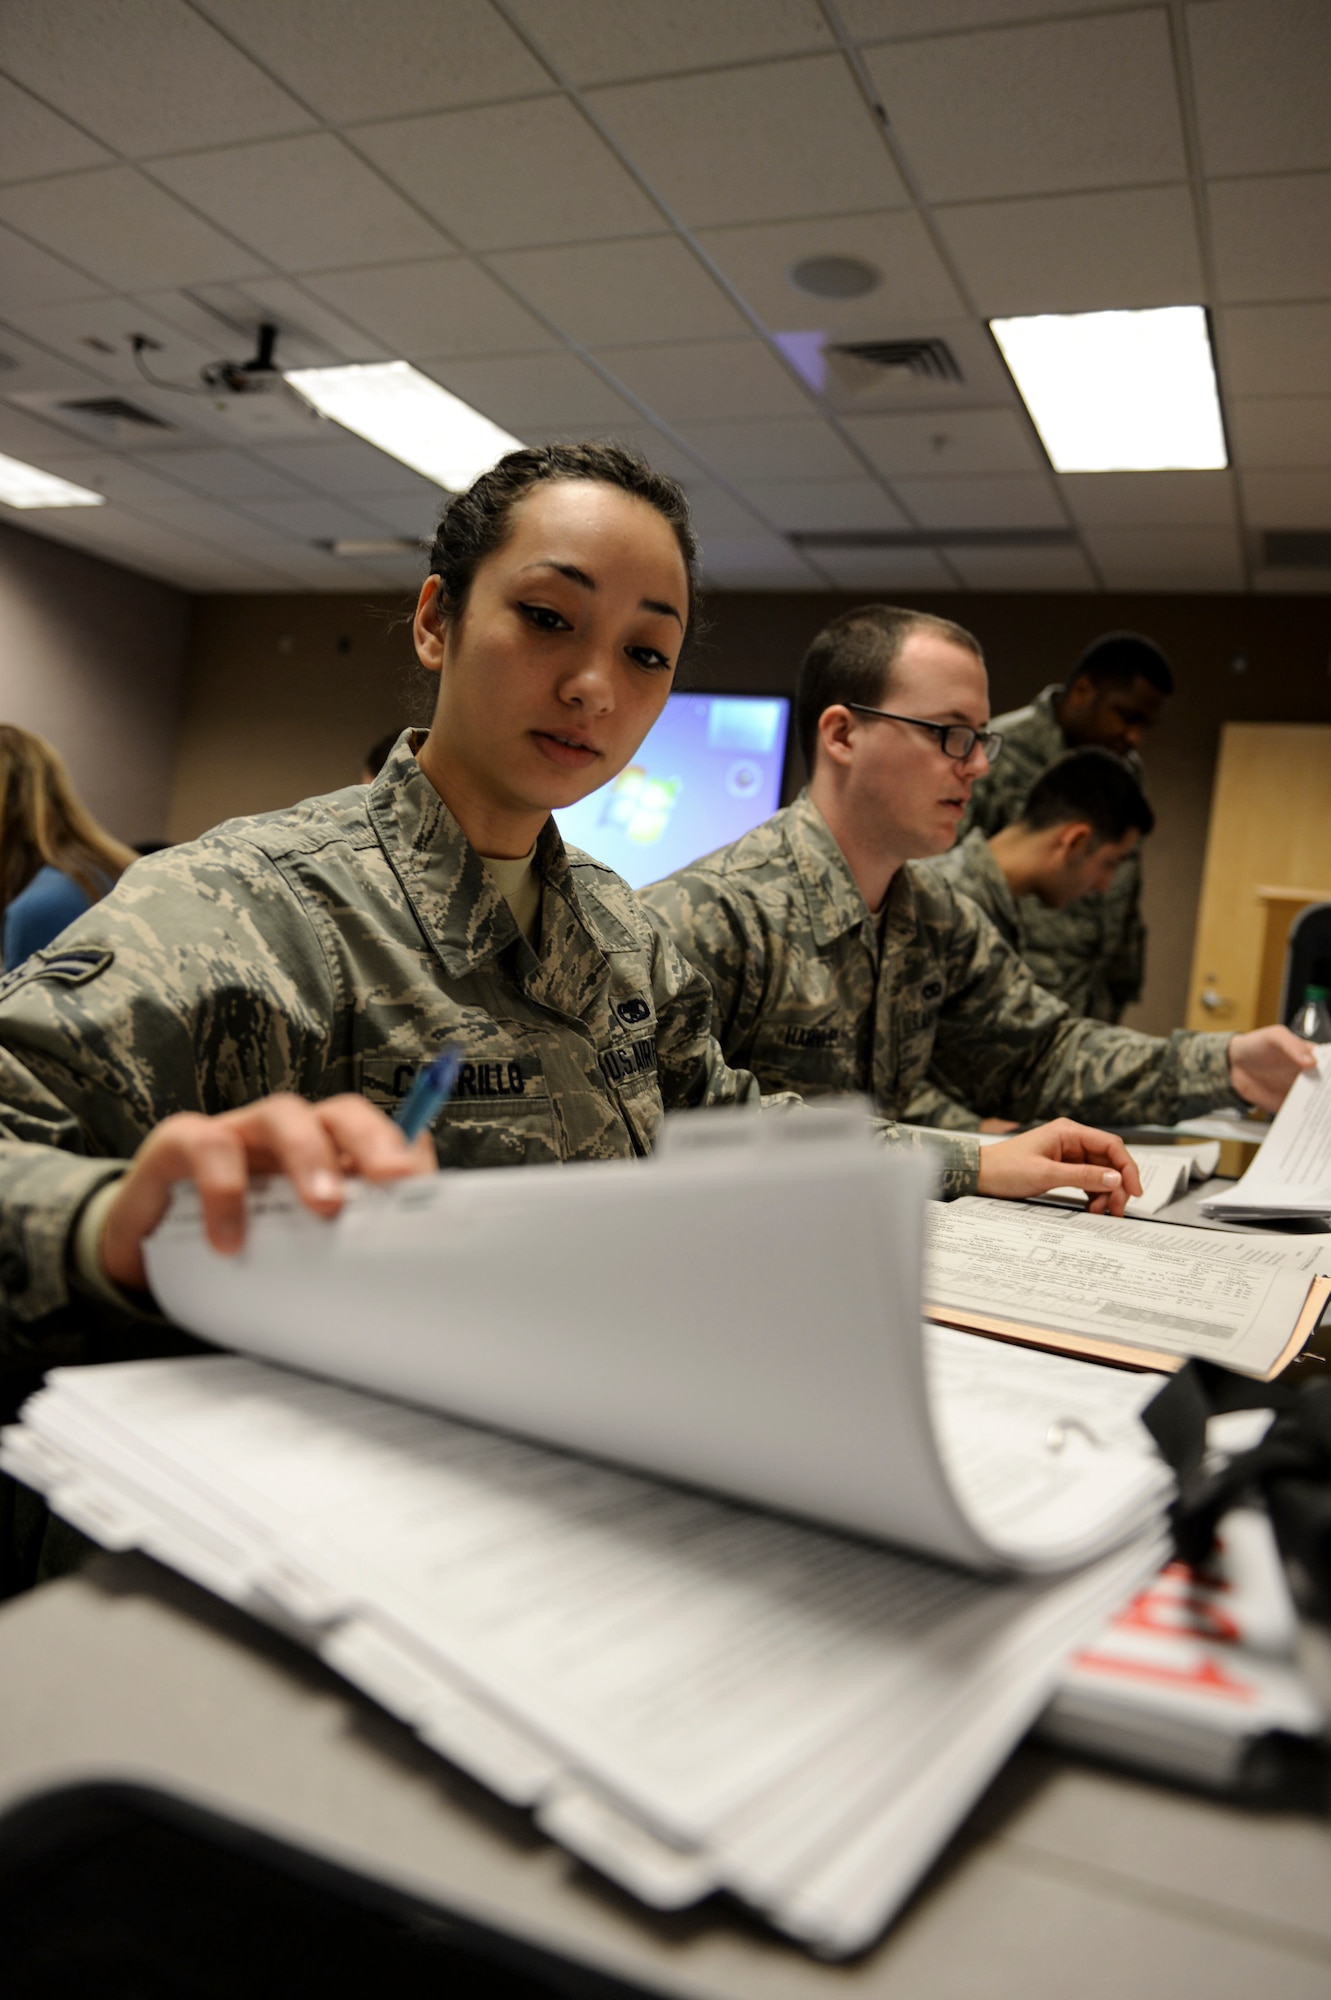 U.S. Air Force Airman 1st Class  Valerie Carrillo, a tax center volunteer, checks tax codes during Volunteer Income Tax Assistance training at Whiteman Air Force Base, Mo., Jan. 19, 2016. Volunteers were taught to handle filing simple, advanced and military tax returns to serve Team Whiteman. (U.S. Air Force photo by Senior Airman Sandra Marrero)